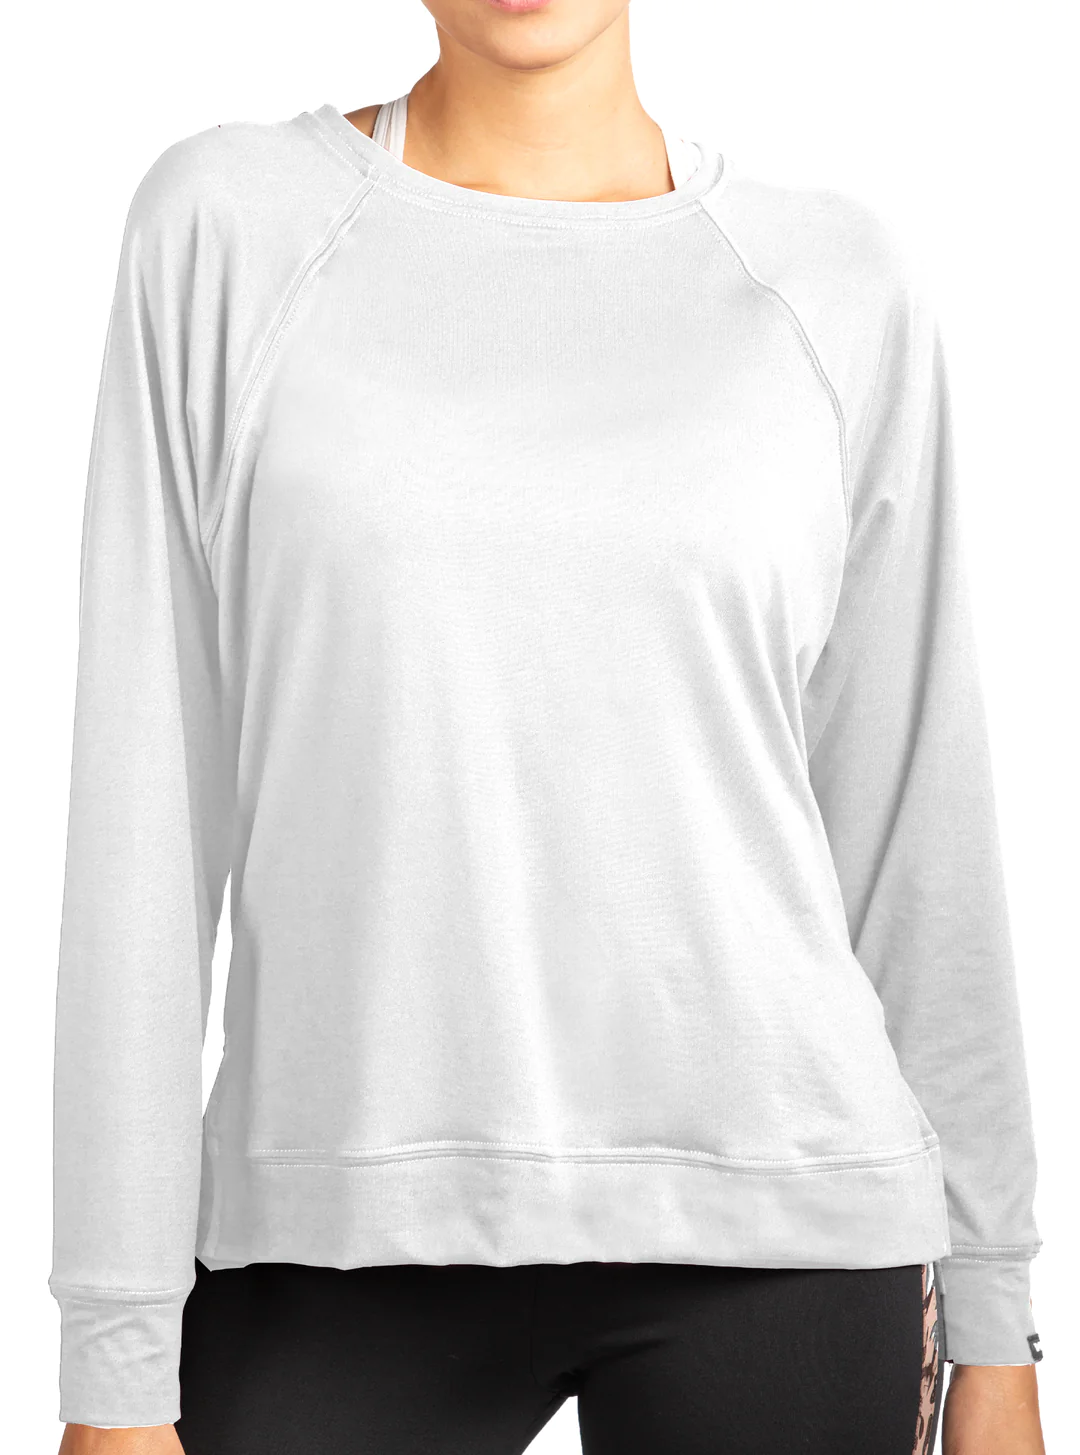 WSI Sports Women's Hyprtech Bamboo Relaxed Fit Long Sleeve posted by ProdOrigin USA in Women's Apparel 